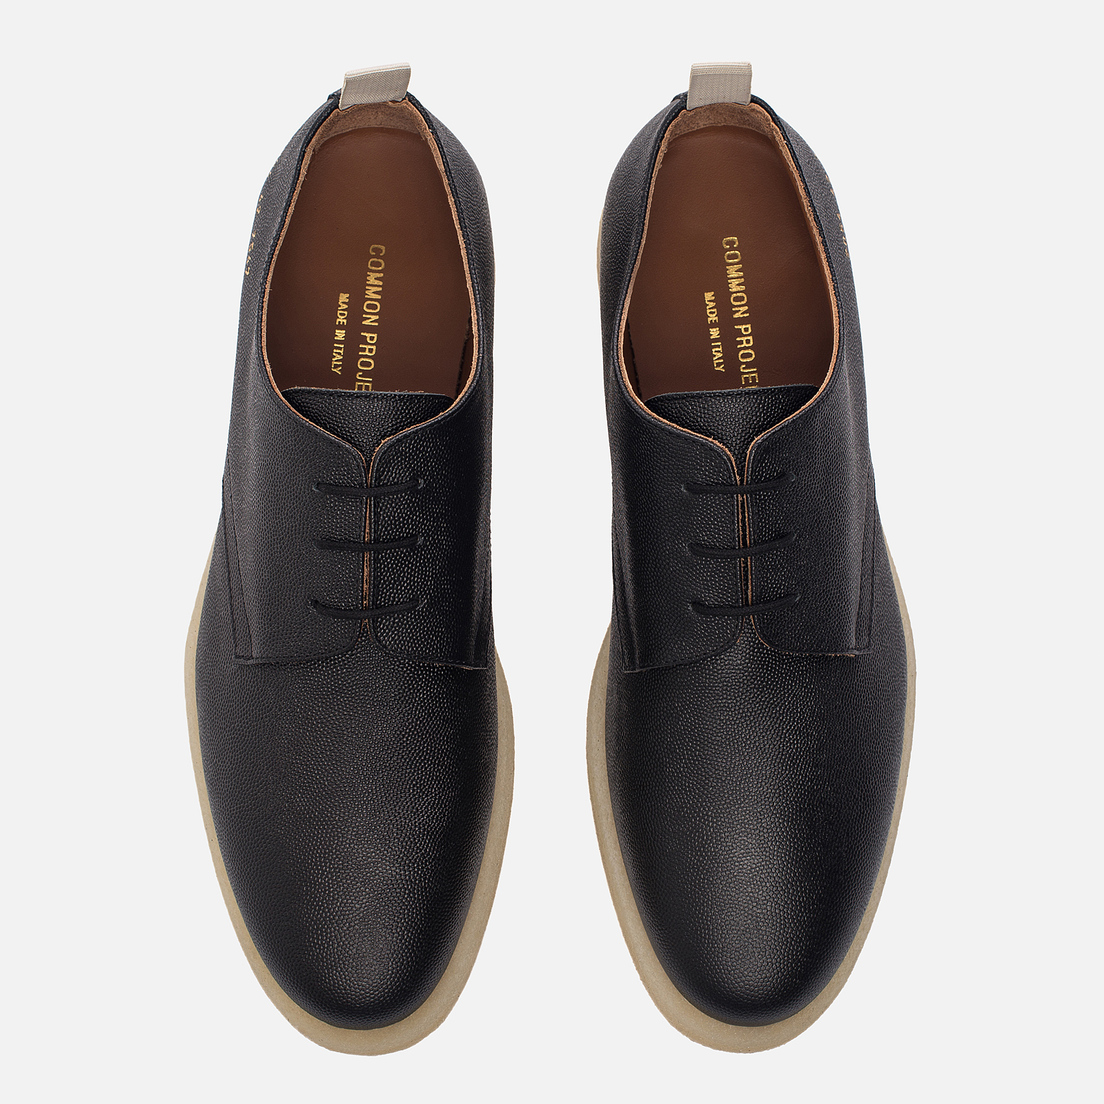 Common Projects Мужские ботинки Cadet Derby Stamped Grain